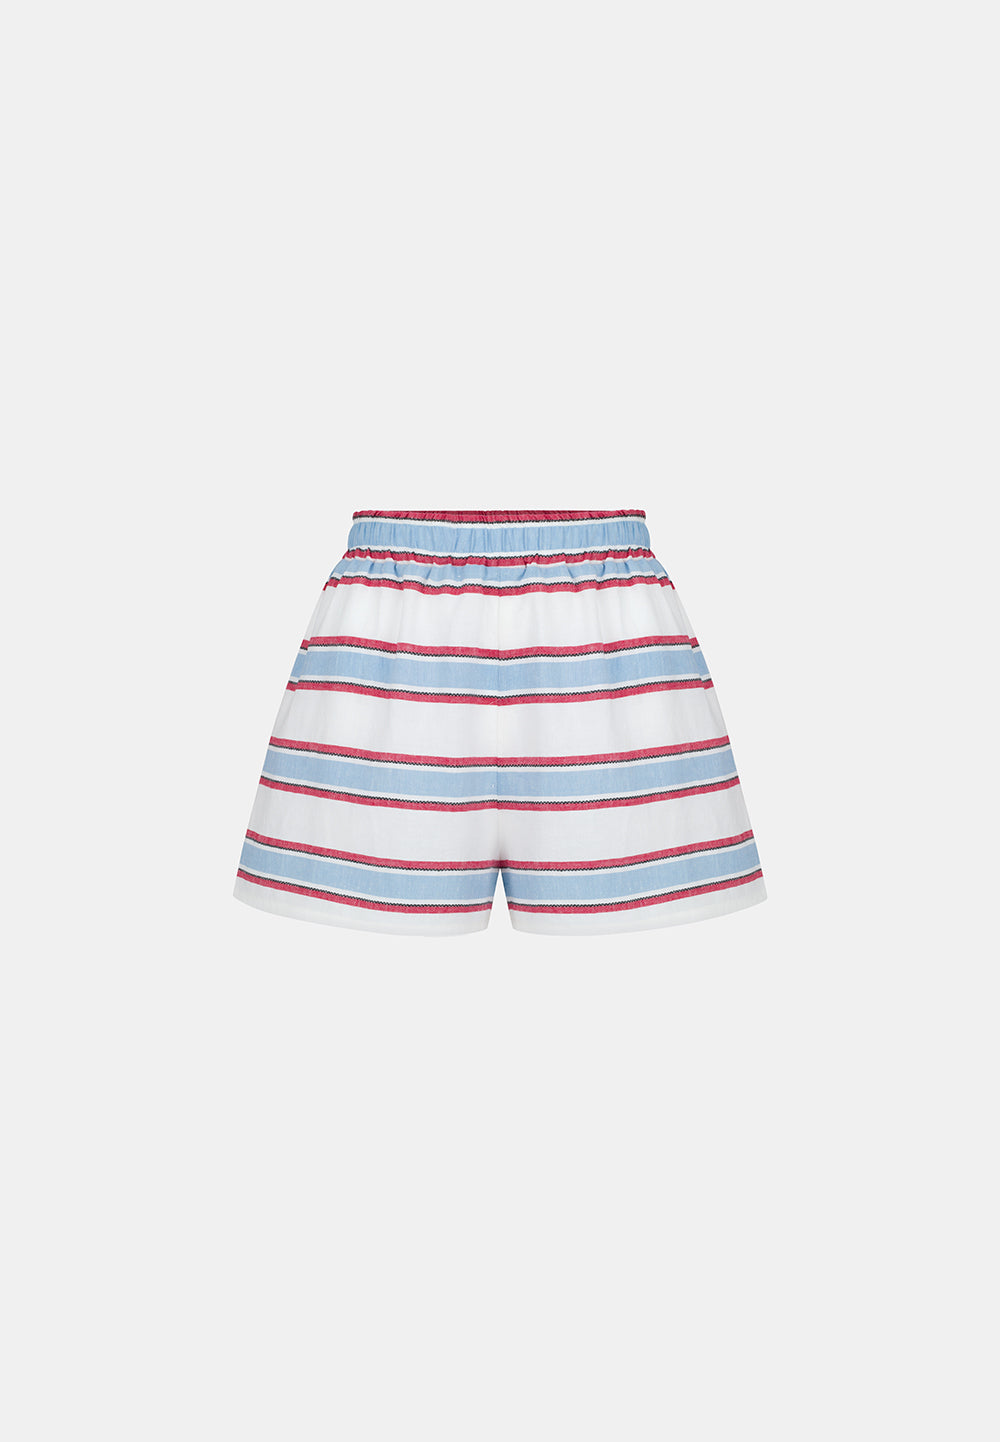 BISCUIT SHORTS STRIPES